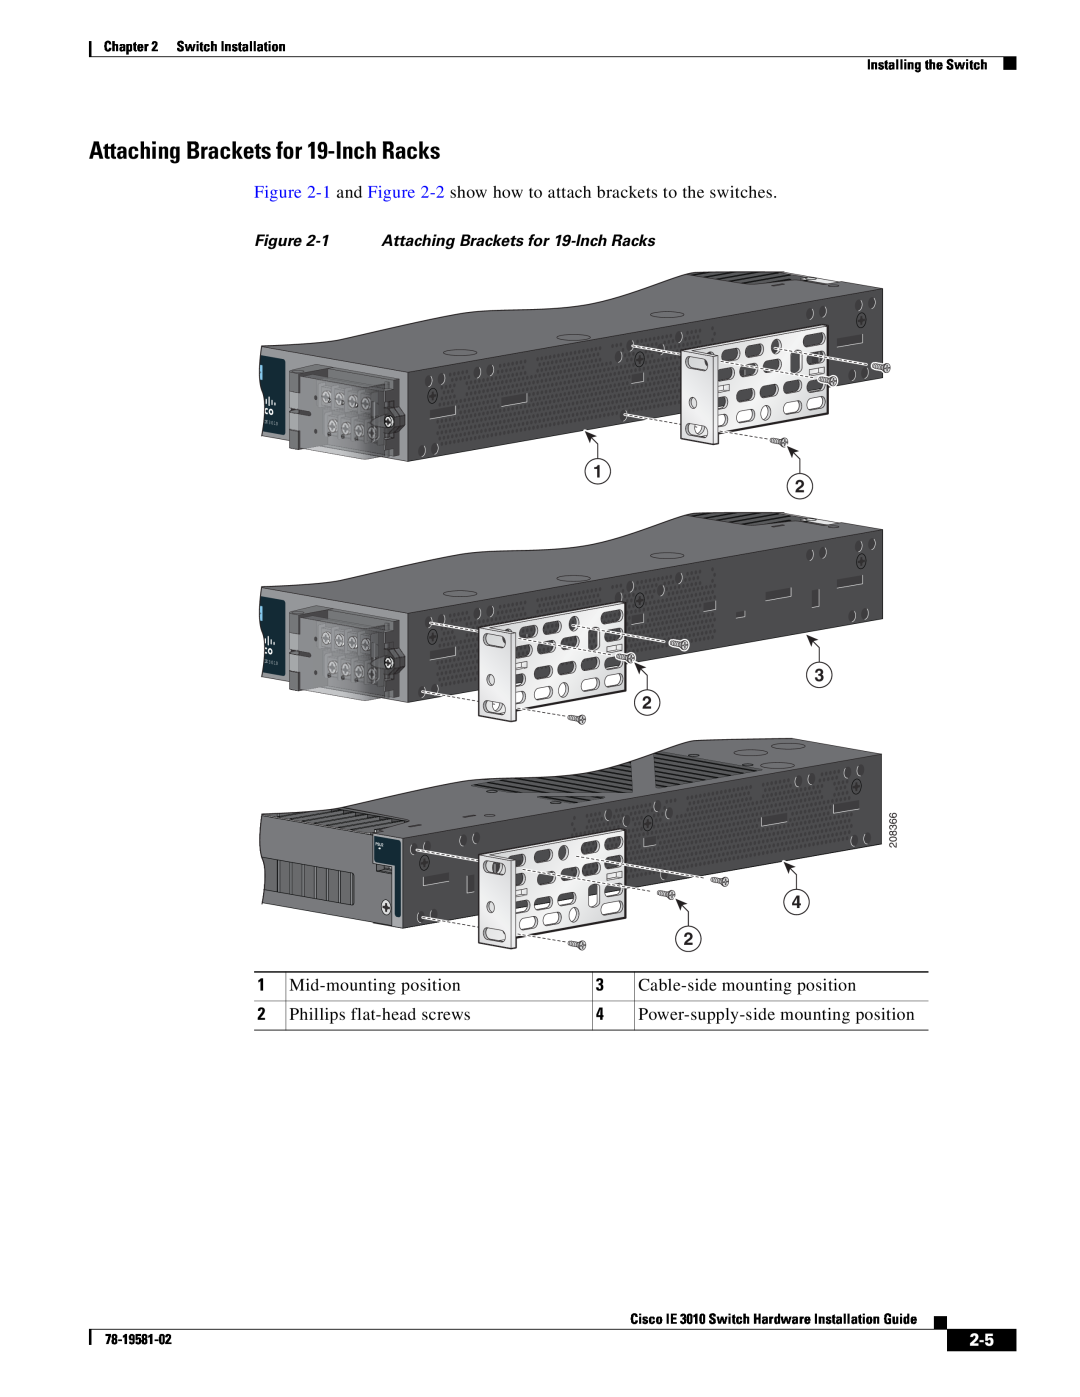 Cisco Systems IE301024TC 1 Attaching Brackets for 19-Inch Racks, Switch Installation Installing the Switch, 208366 